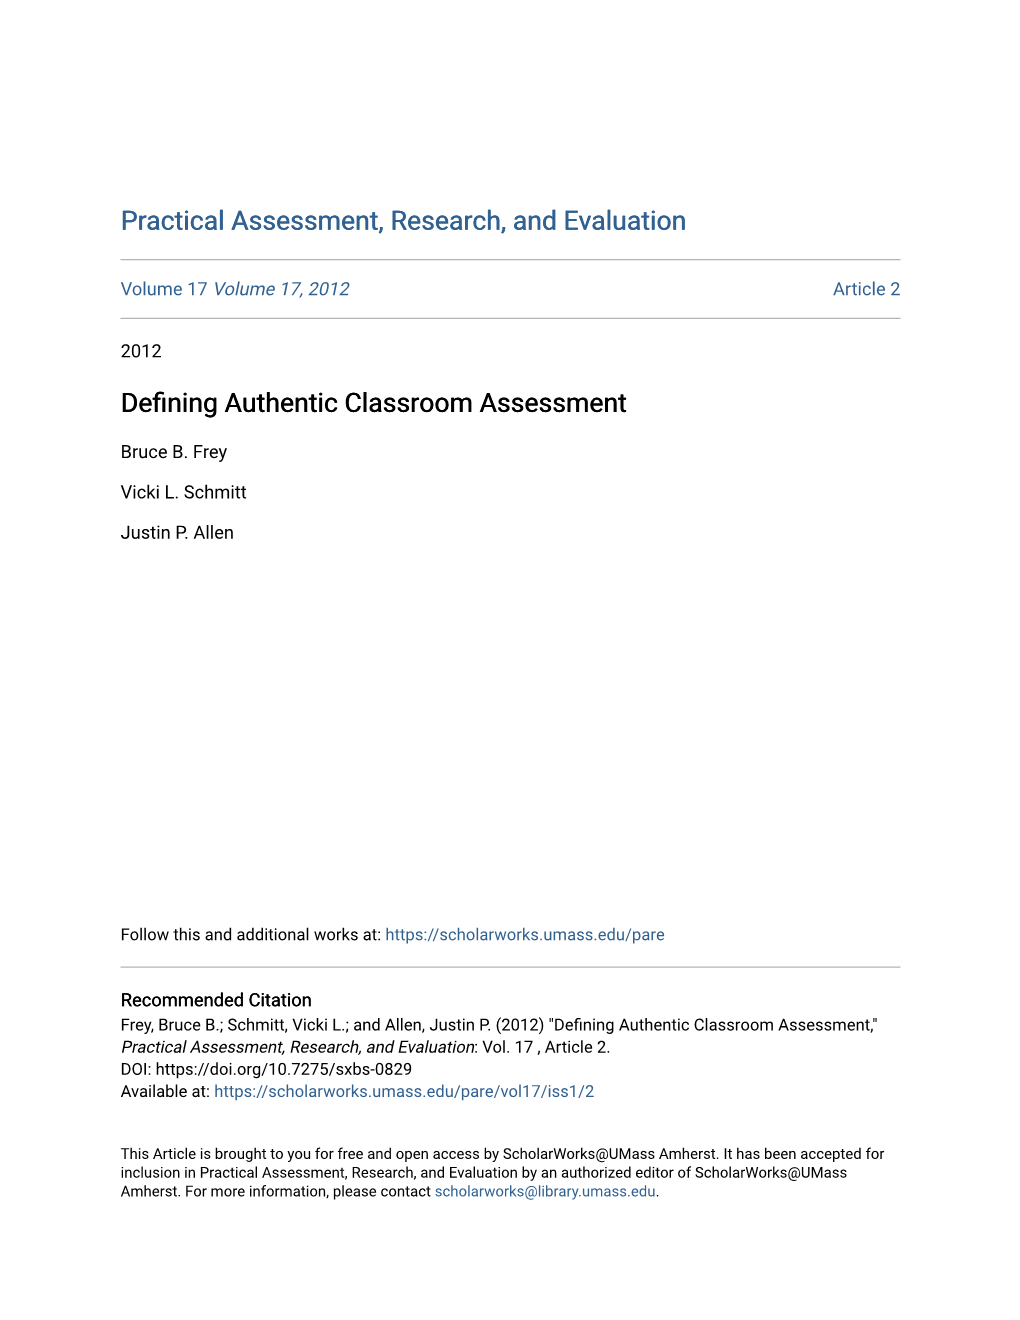 (2012) “Defining Authentic Classroom Assessment,”